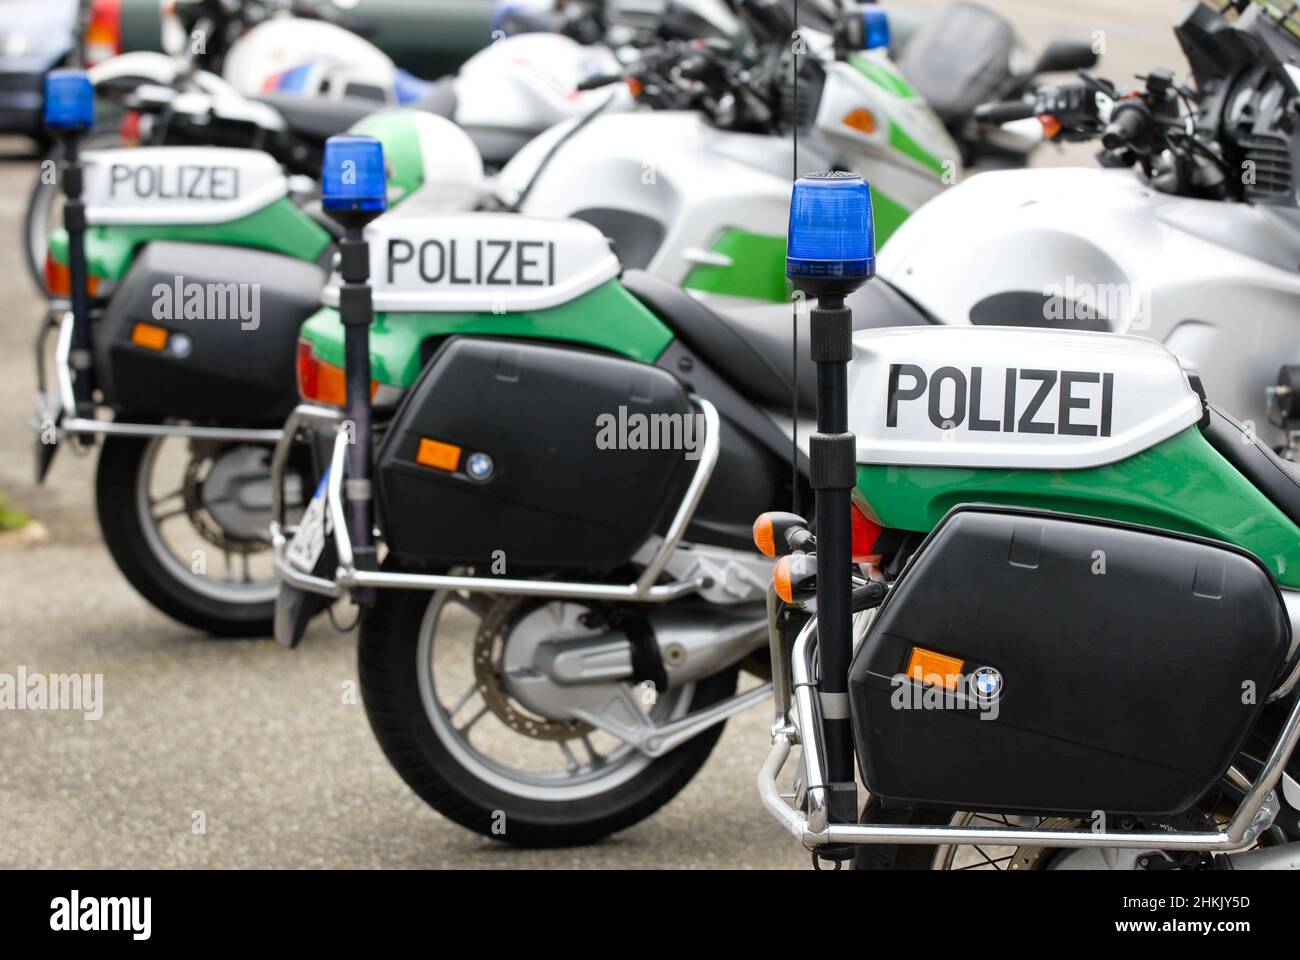 parked police motorcycles, Germany Stock Photo